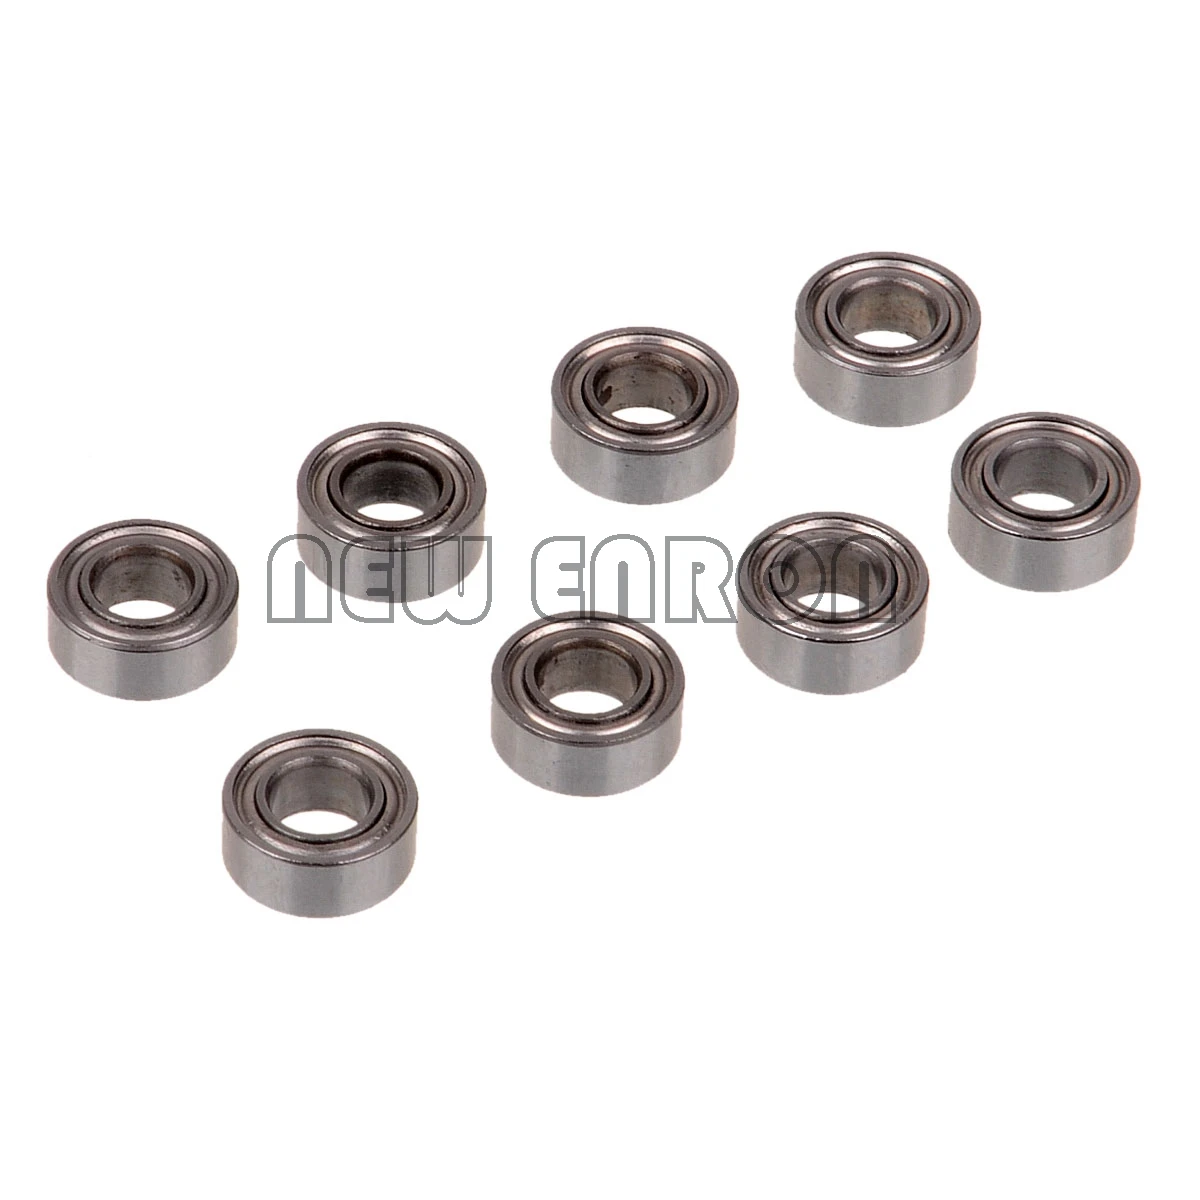 

NEW ENRON Oil Bearing 15*10*4 R86046 RC RC Crawler RGT 1/10 Monster Truck Off Road Rock Cruiser EX86100 Spare parts